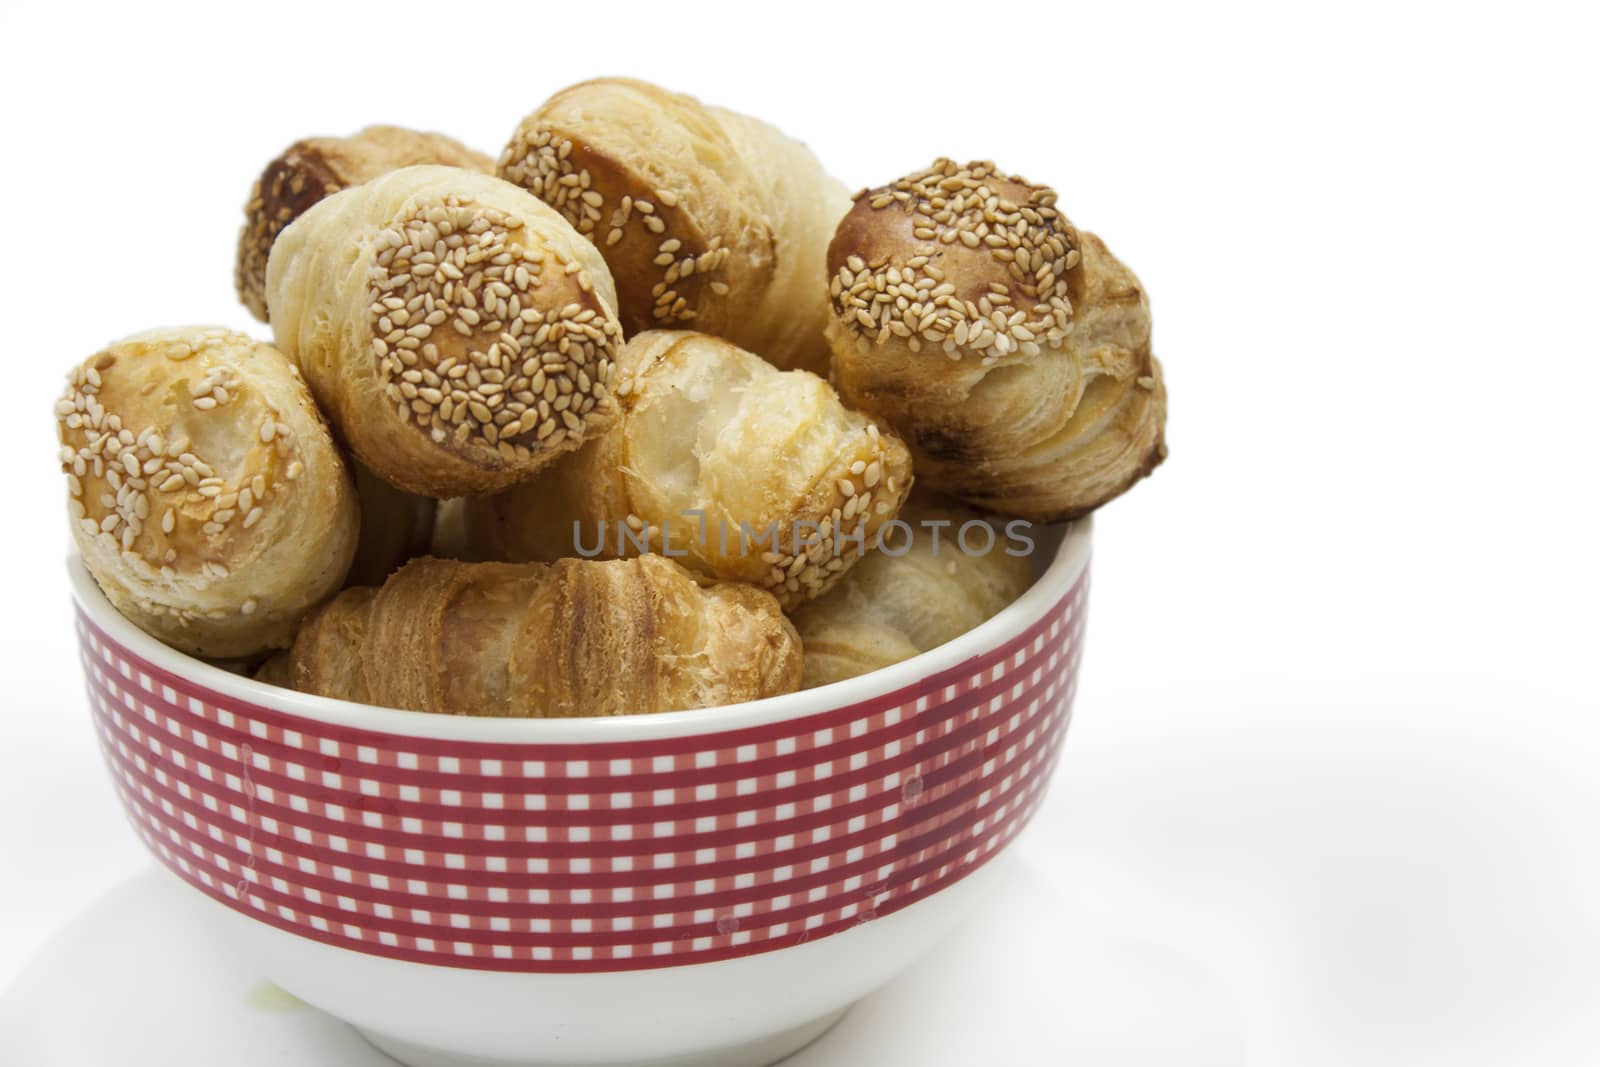 Pastry in the porcelain bowl with white background.